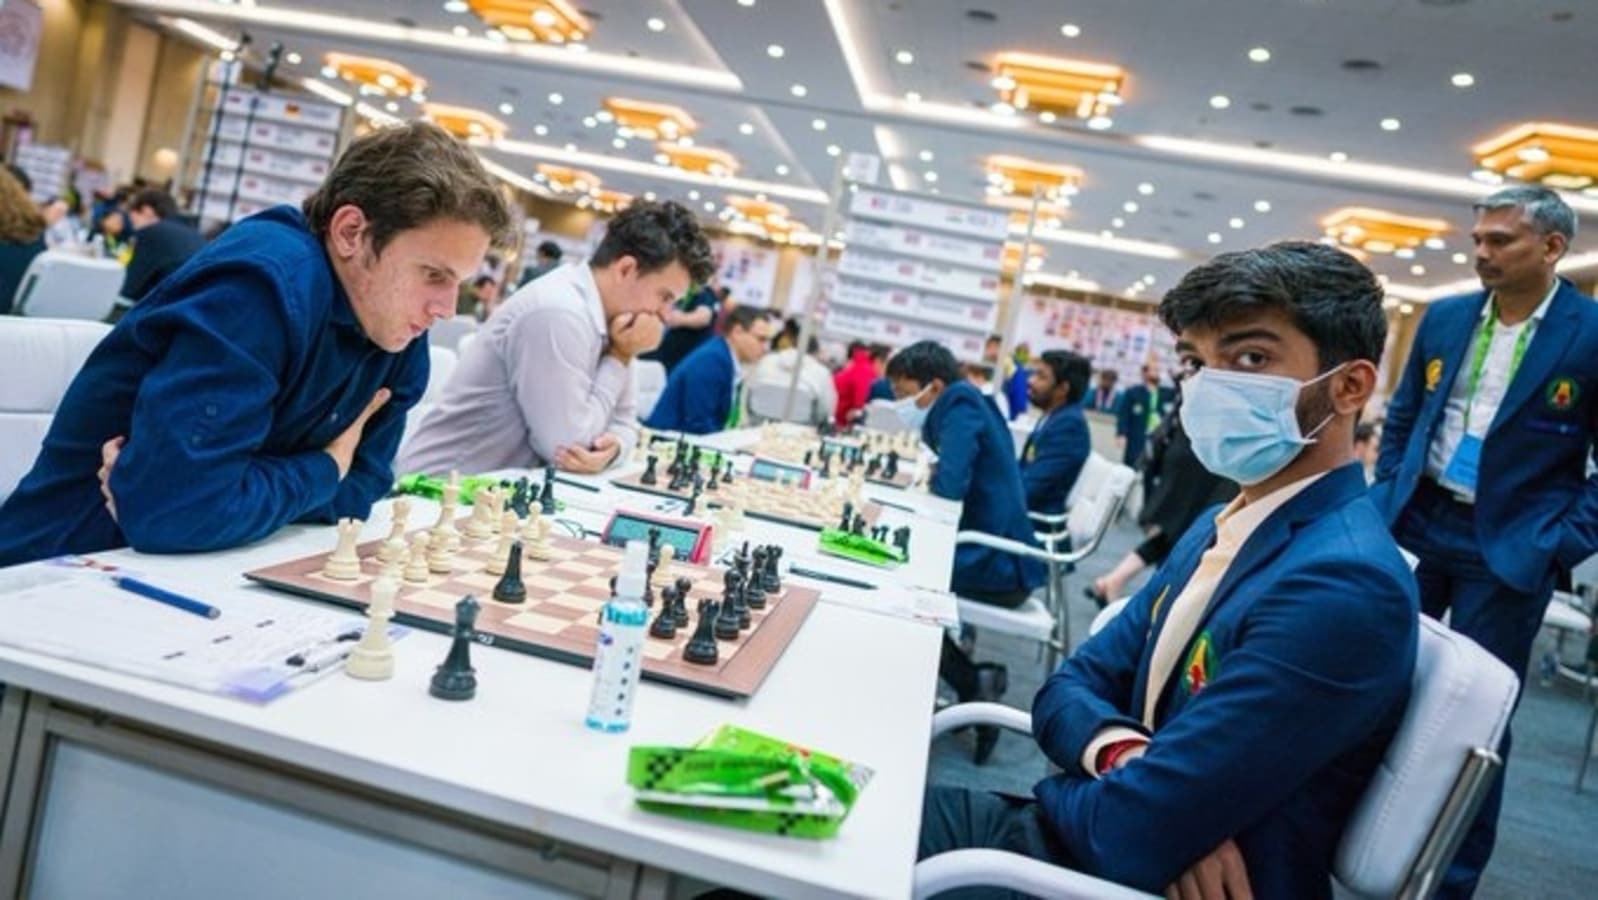 Chess Olympiad: India 'A', 'B' post wins in Open section